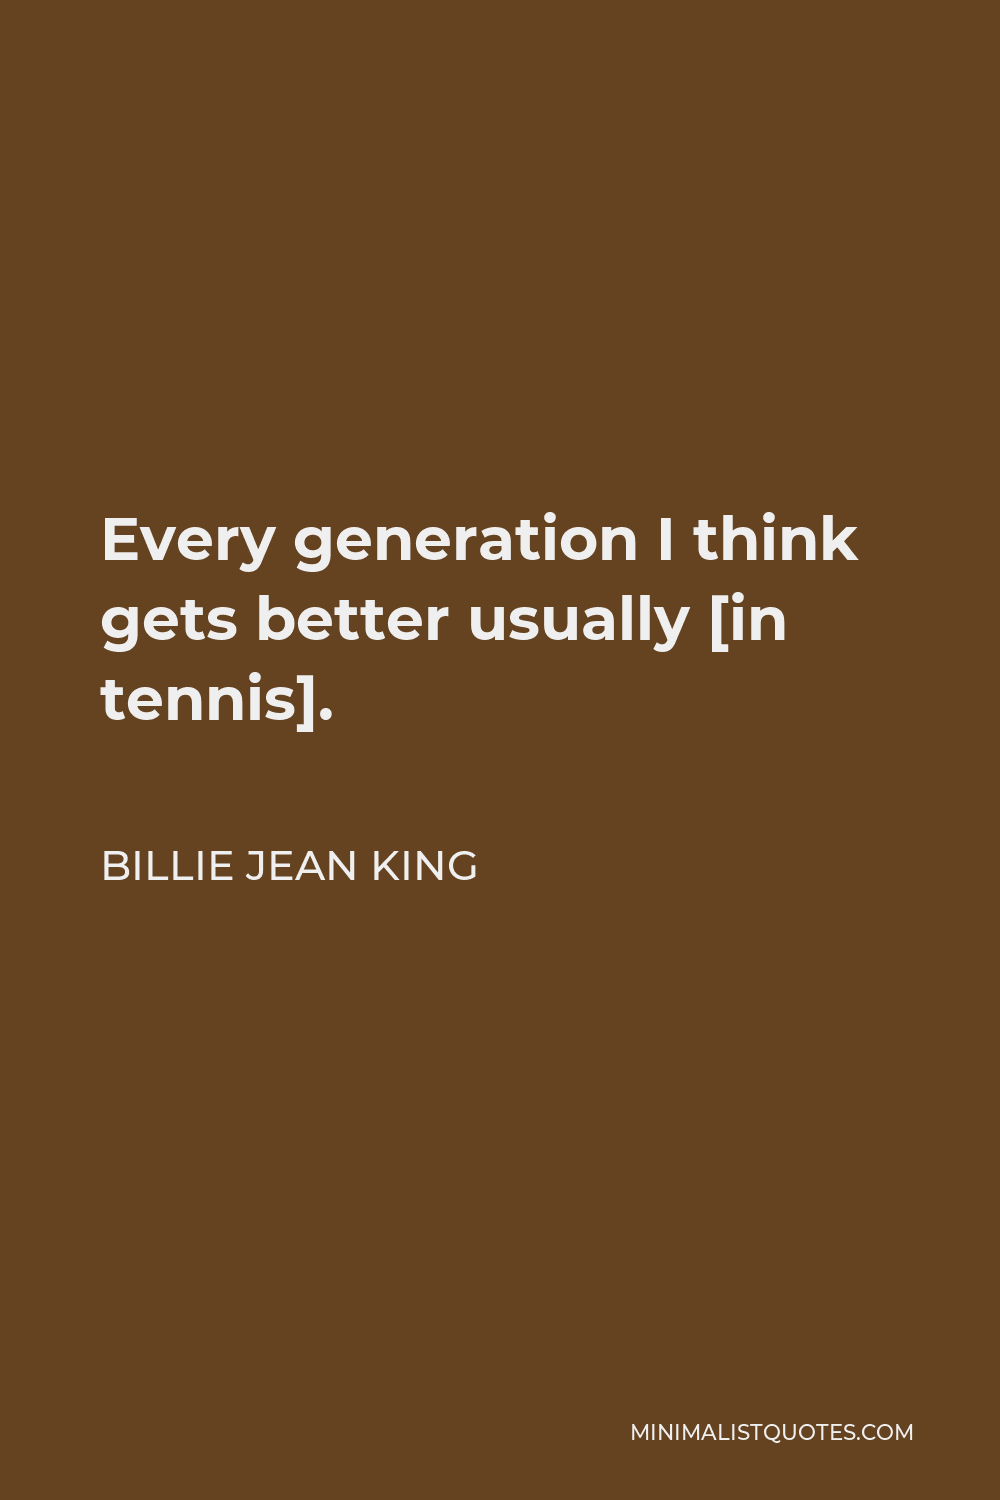 Billie Jean King Quote - Every generation I think gets better usually [in tennis].